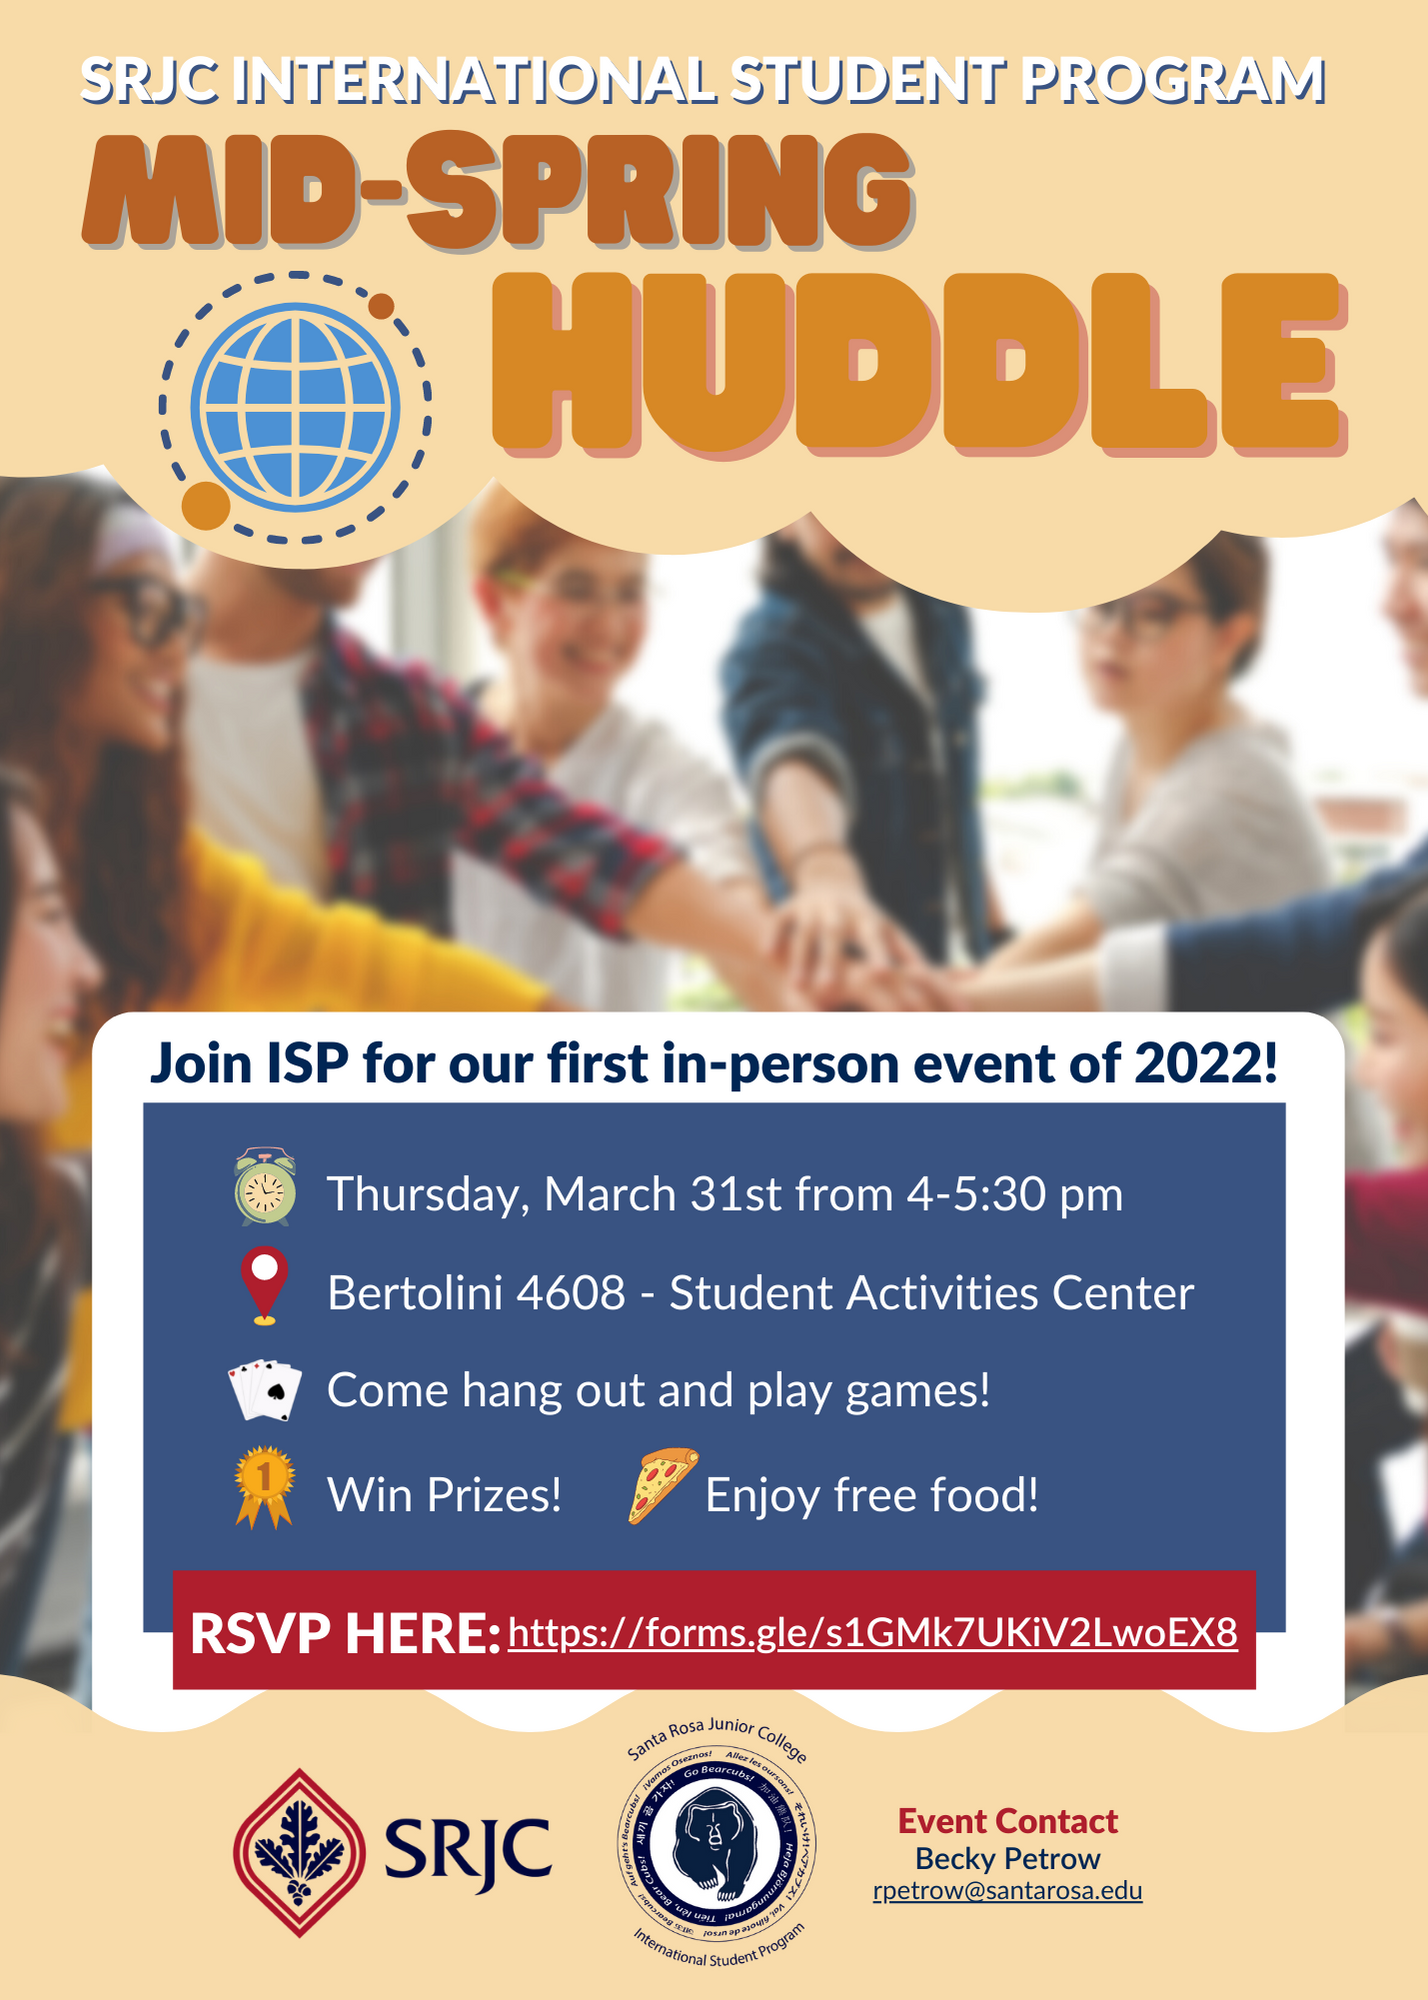 SRJC International Student Program Mid-Spring Huddle. Join ISP for our first in-person event of 2022! Thursday, March 31st from 4 until 5:30pm in Bertolini 4608 Student Activities Center. Come hang out and play games! Win prizes! Enjoy free food! RSVP Here: https://forms.gle.s1FMk7UKiV2LwoEX8 SRJC International Student Program Event Contact Becky Petrow rpetrow@santarosa.edu